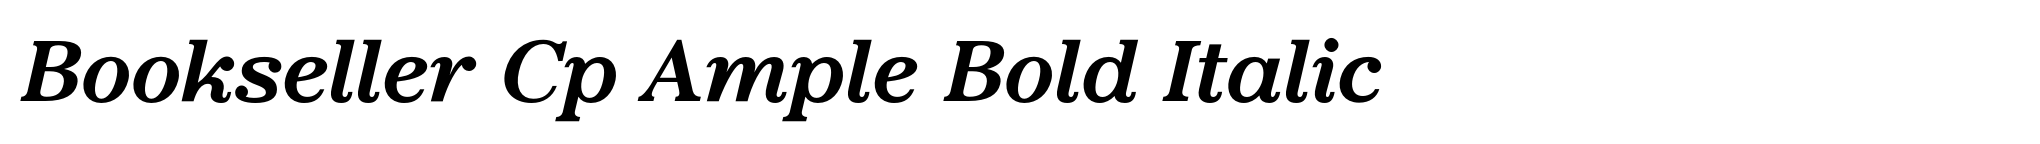 Bookseller Cp Ample Bold Italic image